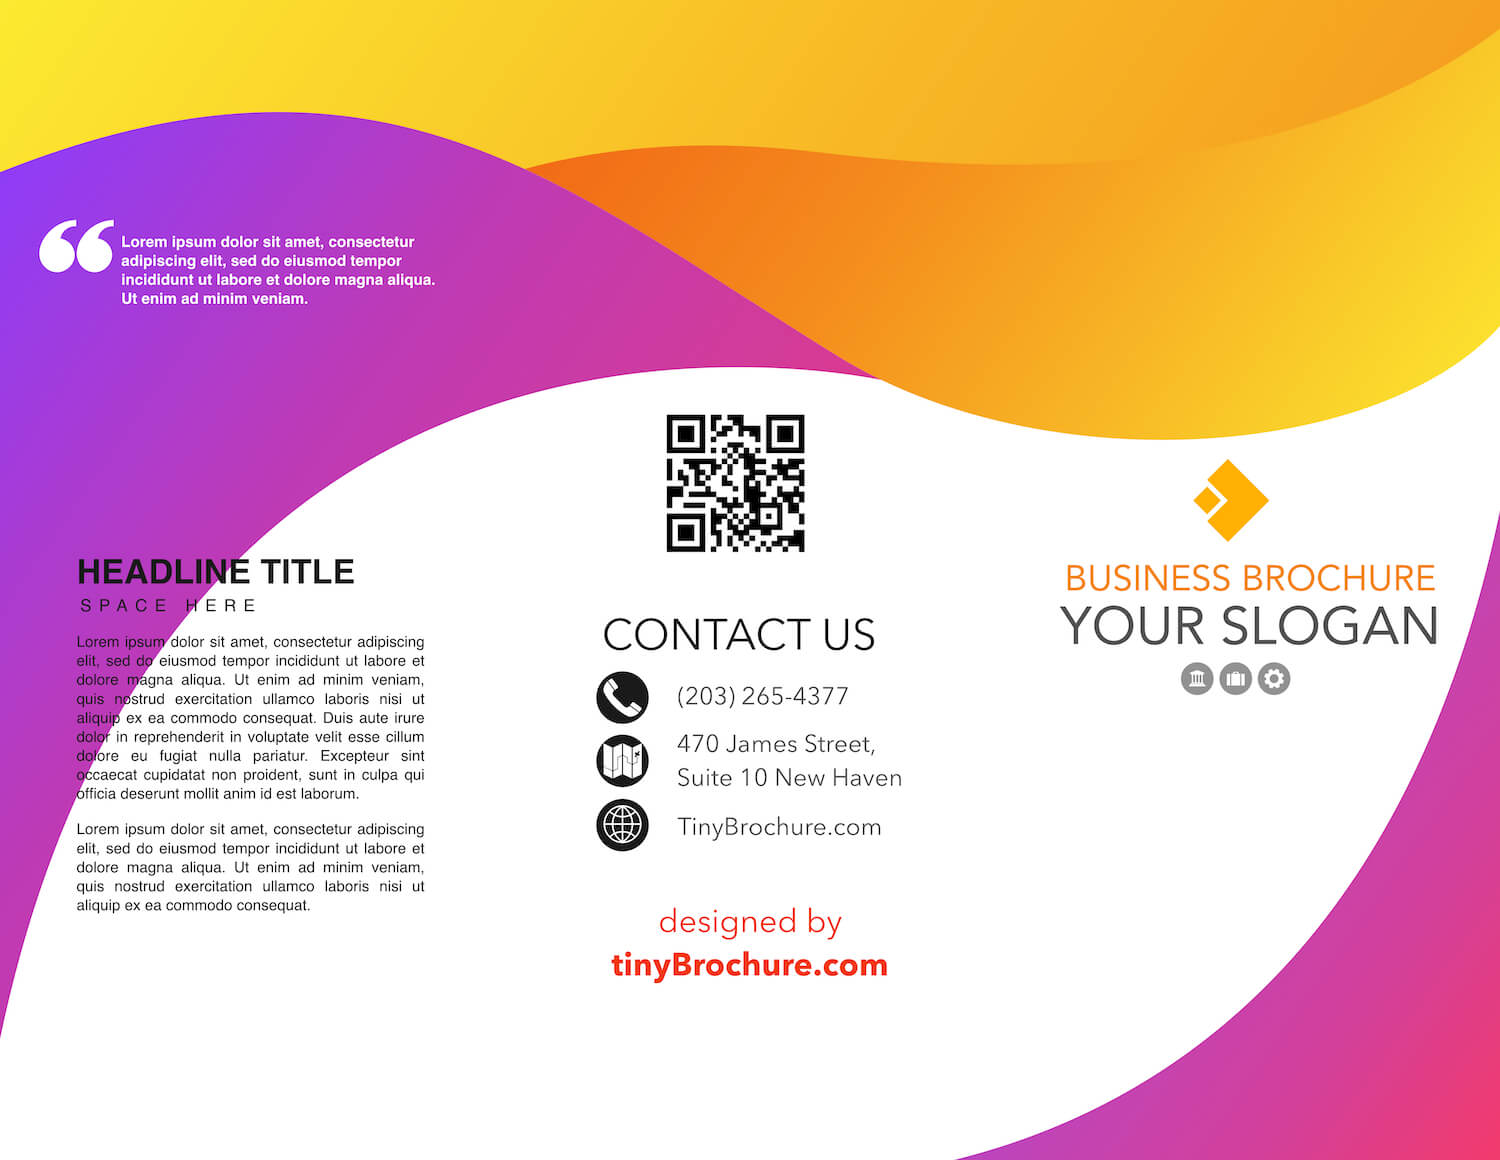 How To Make A Tri Fold Brochure In Google Docs Intended For Tri Fold Brochure Template Google